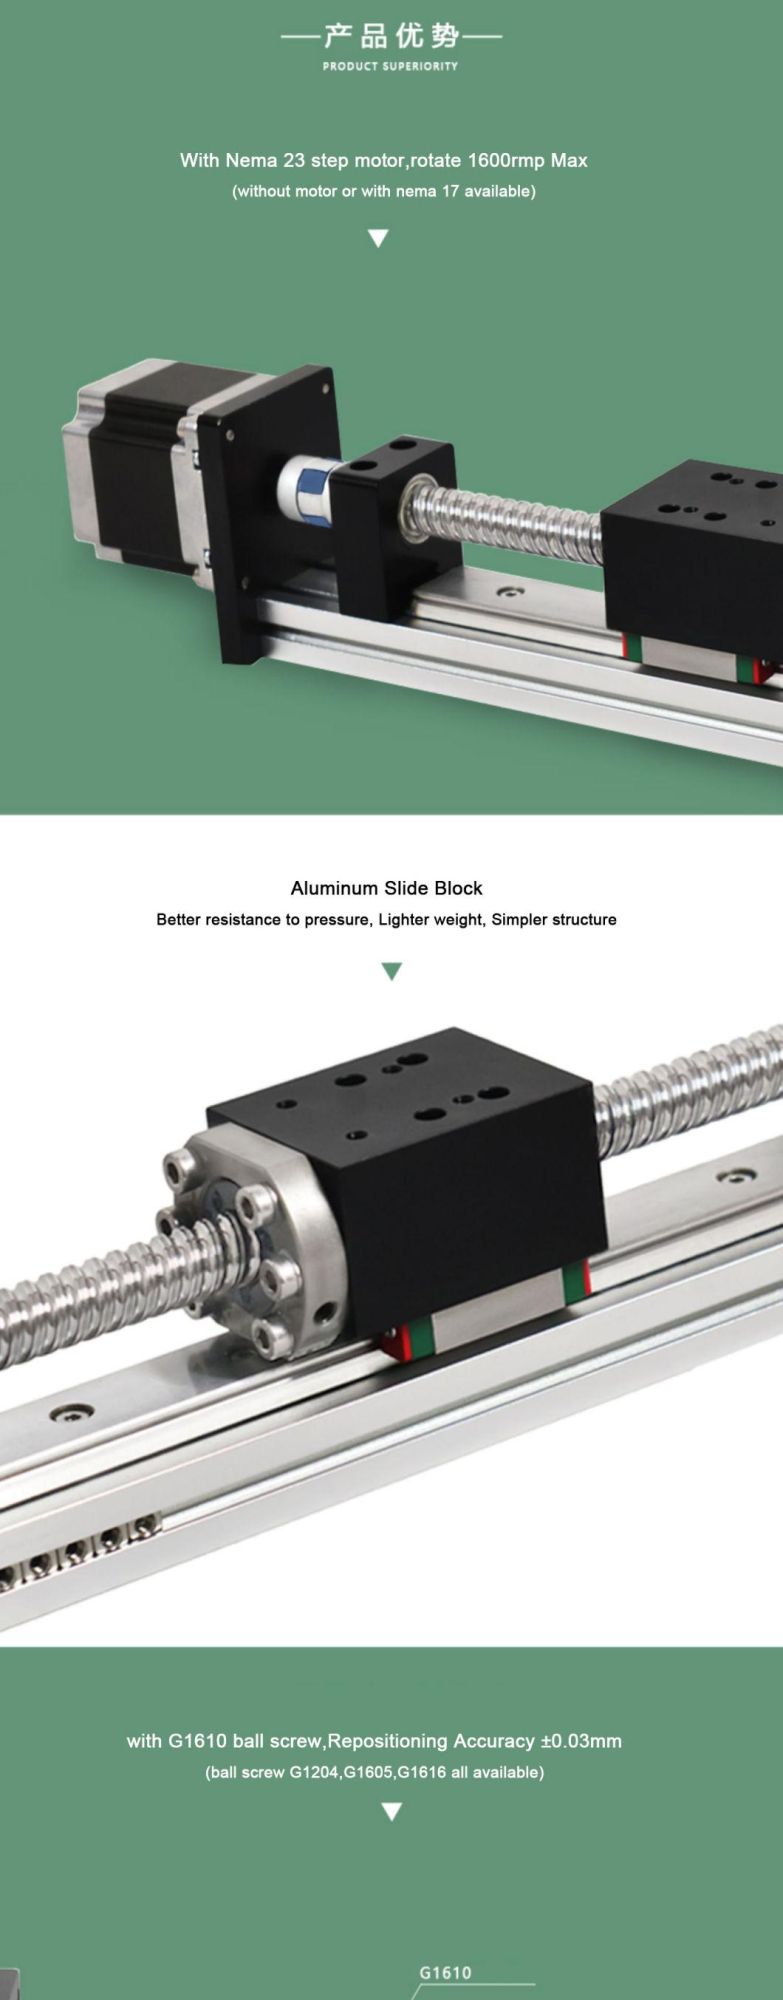 CNC Linear Guide Table C7 Ball Screw Motion Rail with NEMA 23 Step Motor